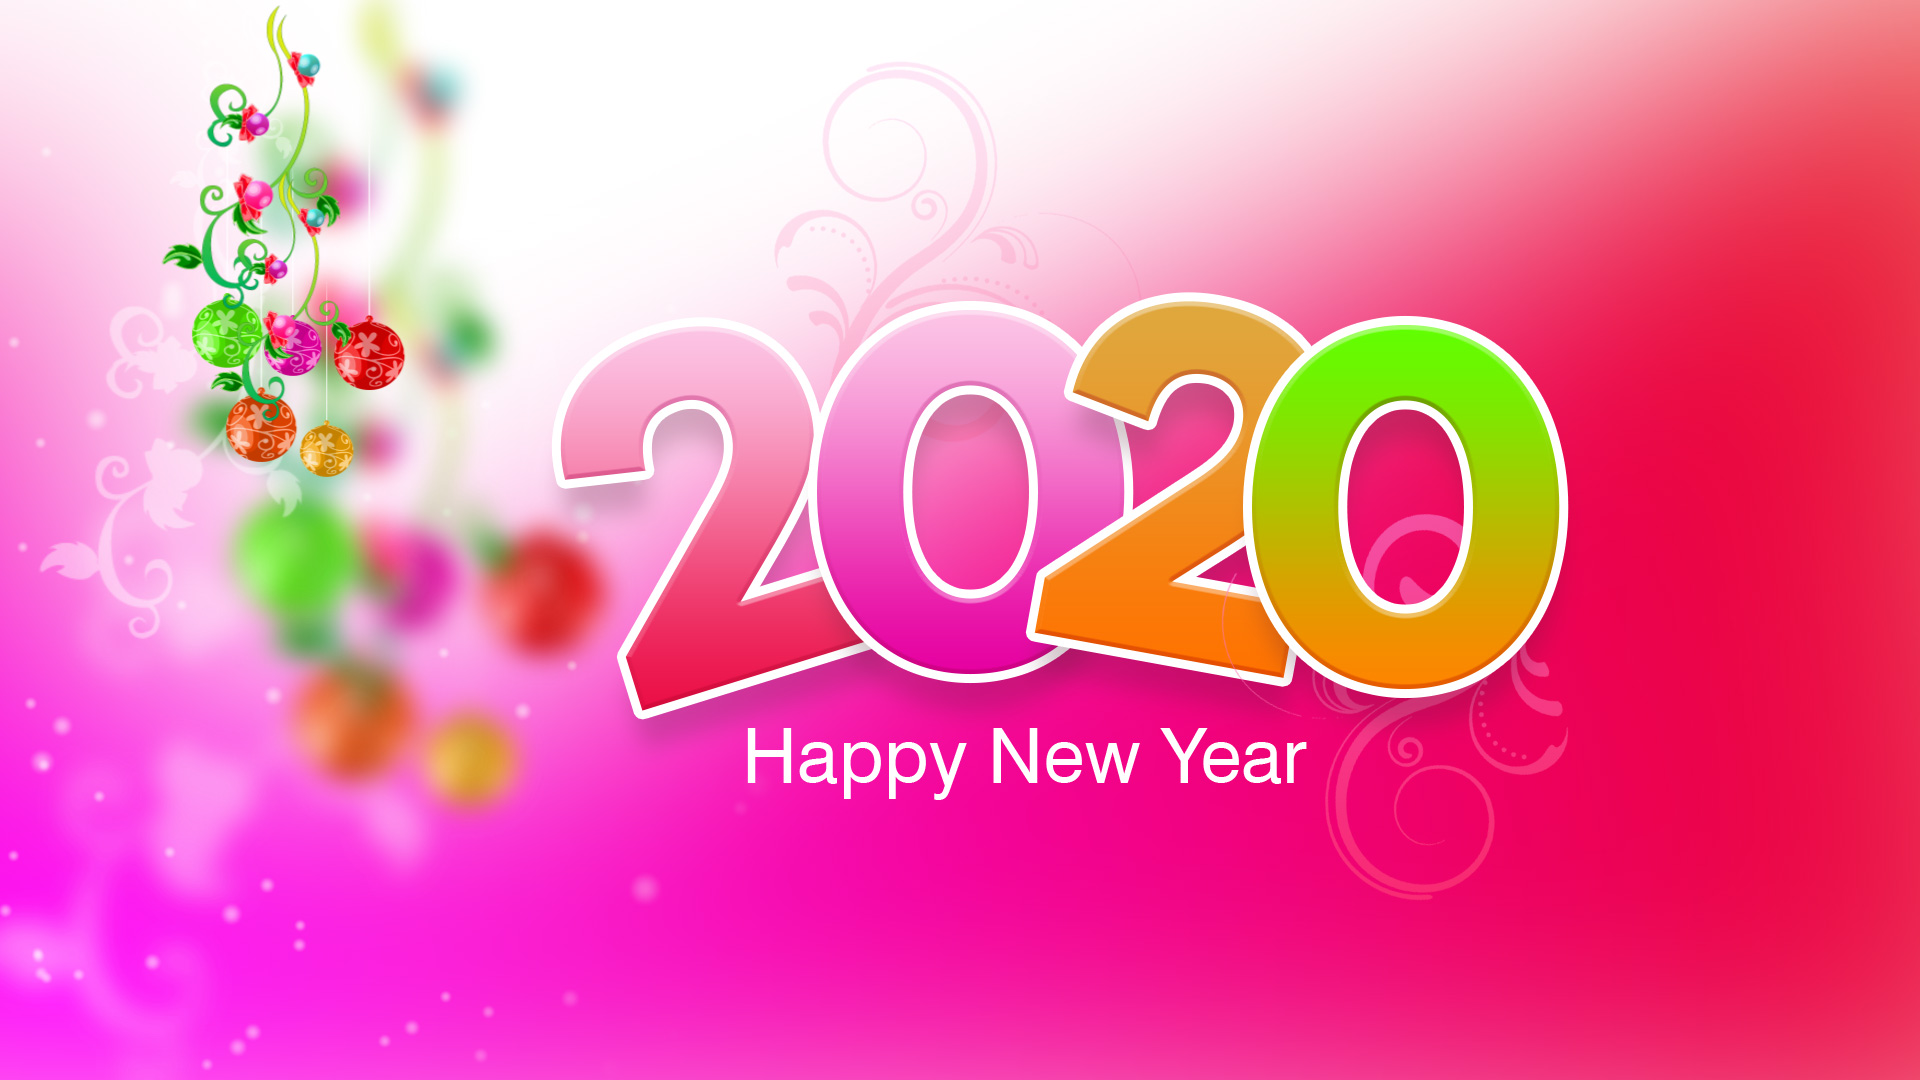 Happy New Year 2020 Wishes and Images